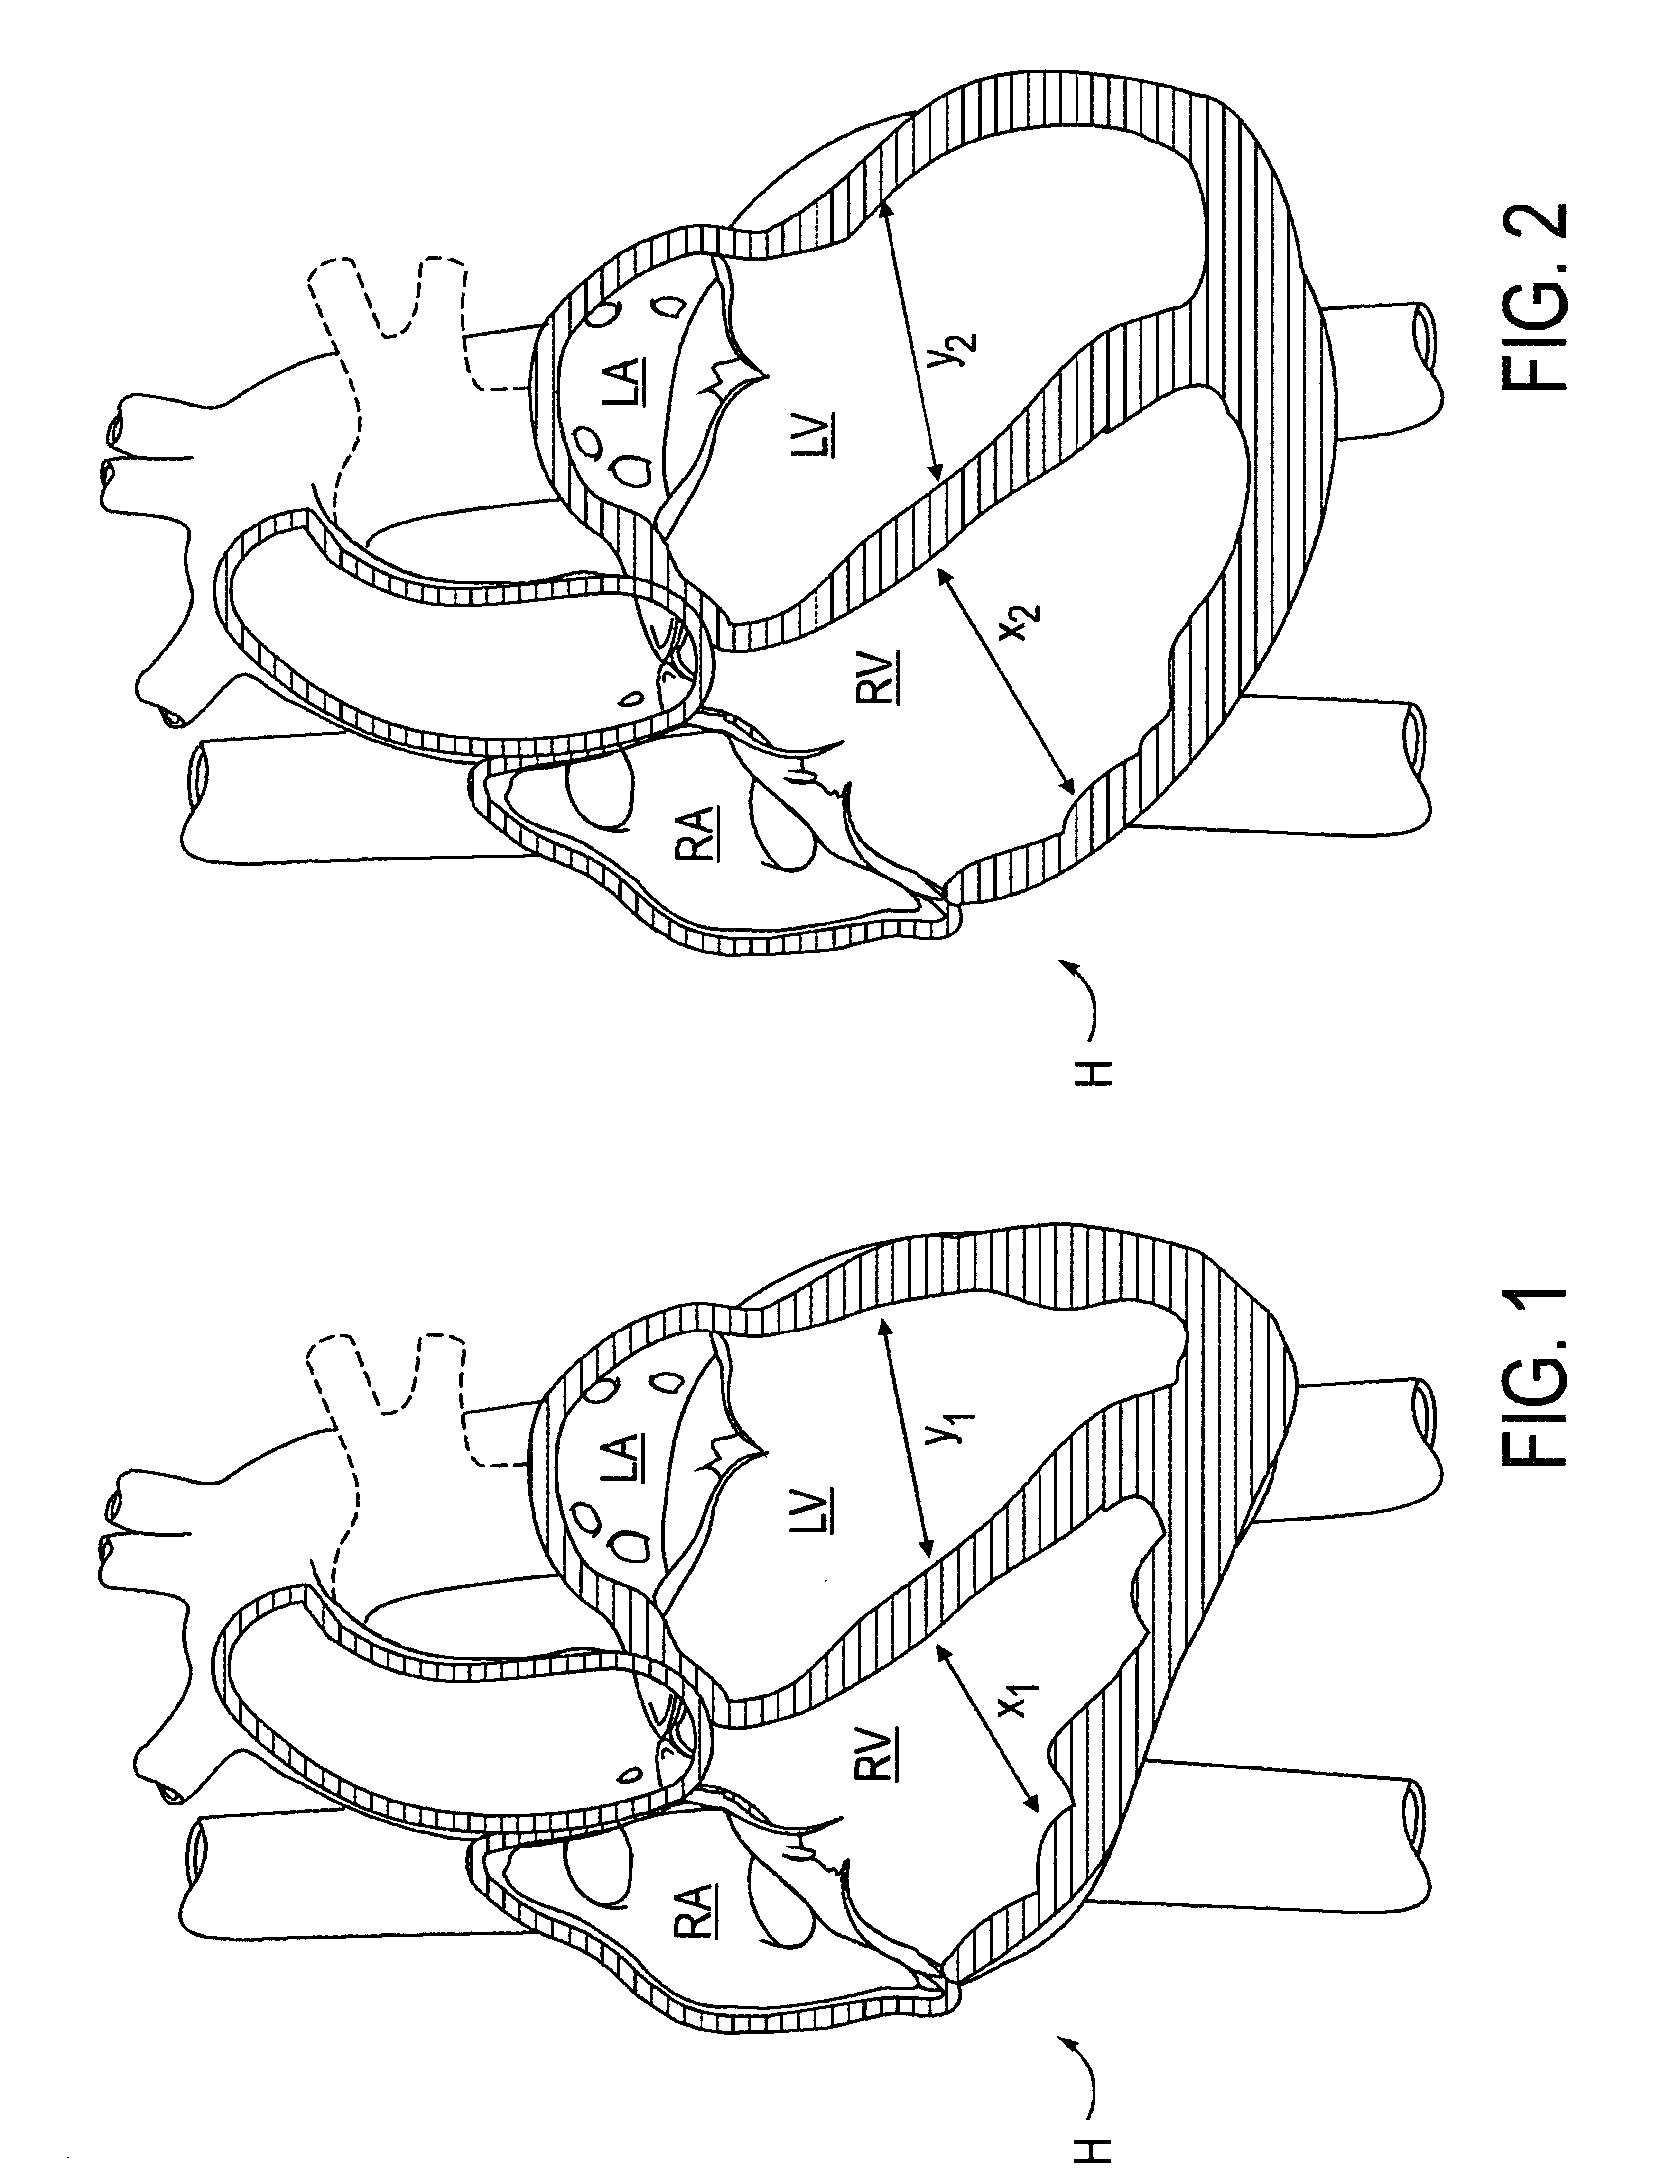 Magnetic devices and methods for reshaping heart anatomy